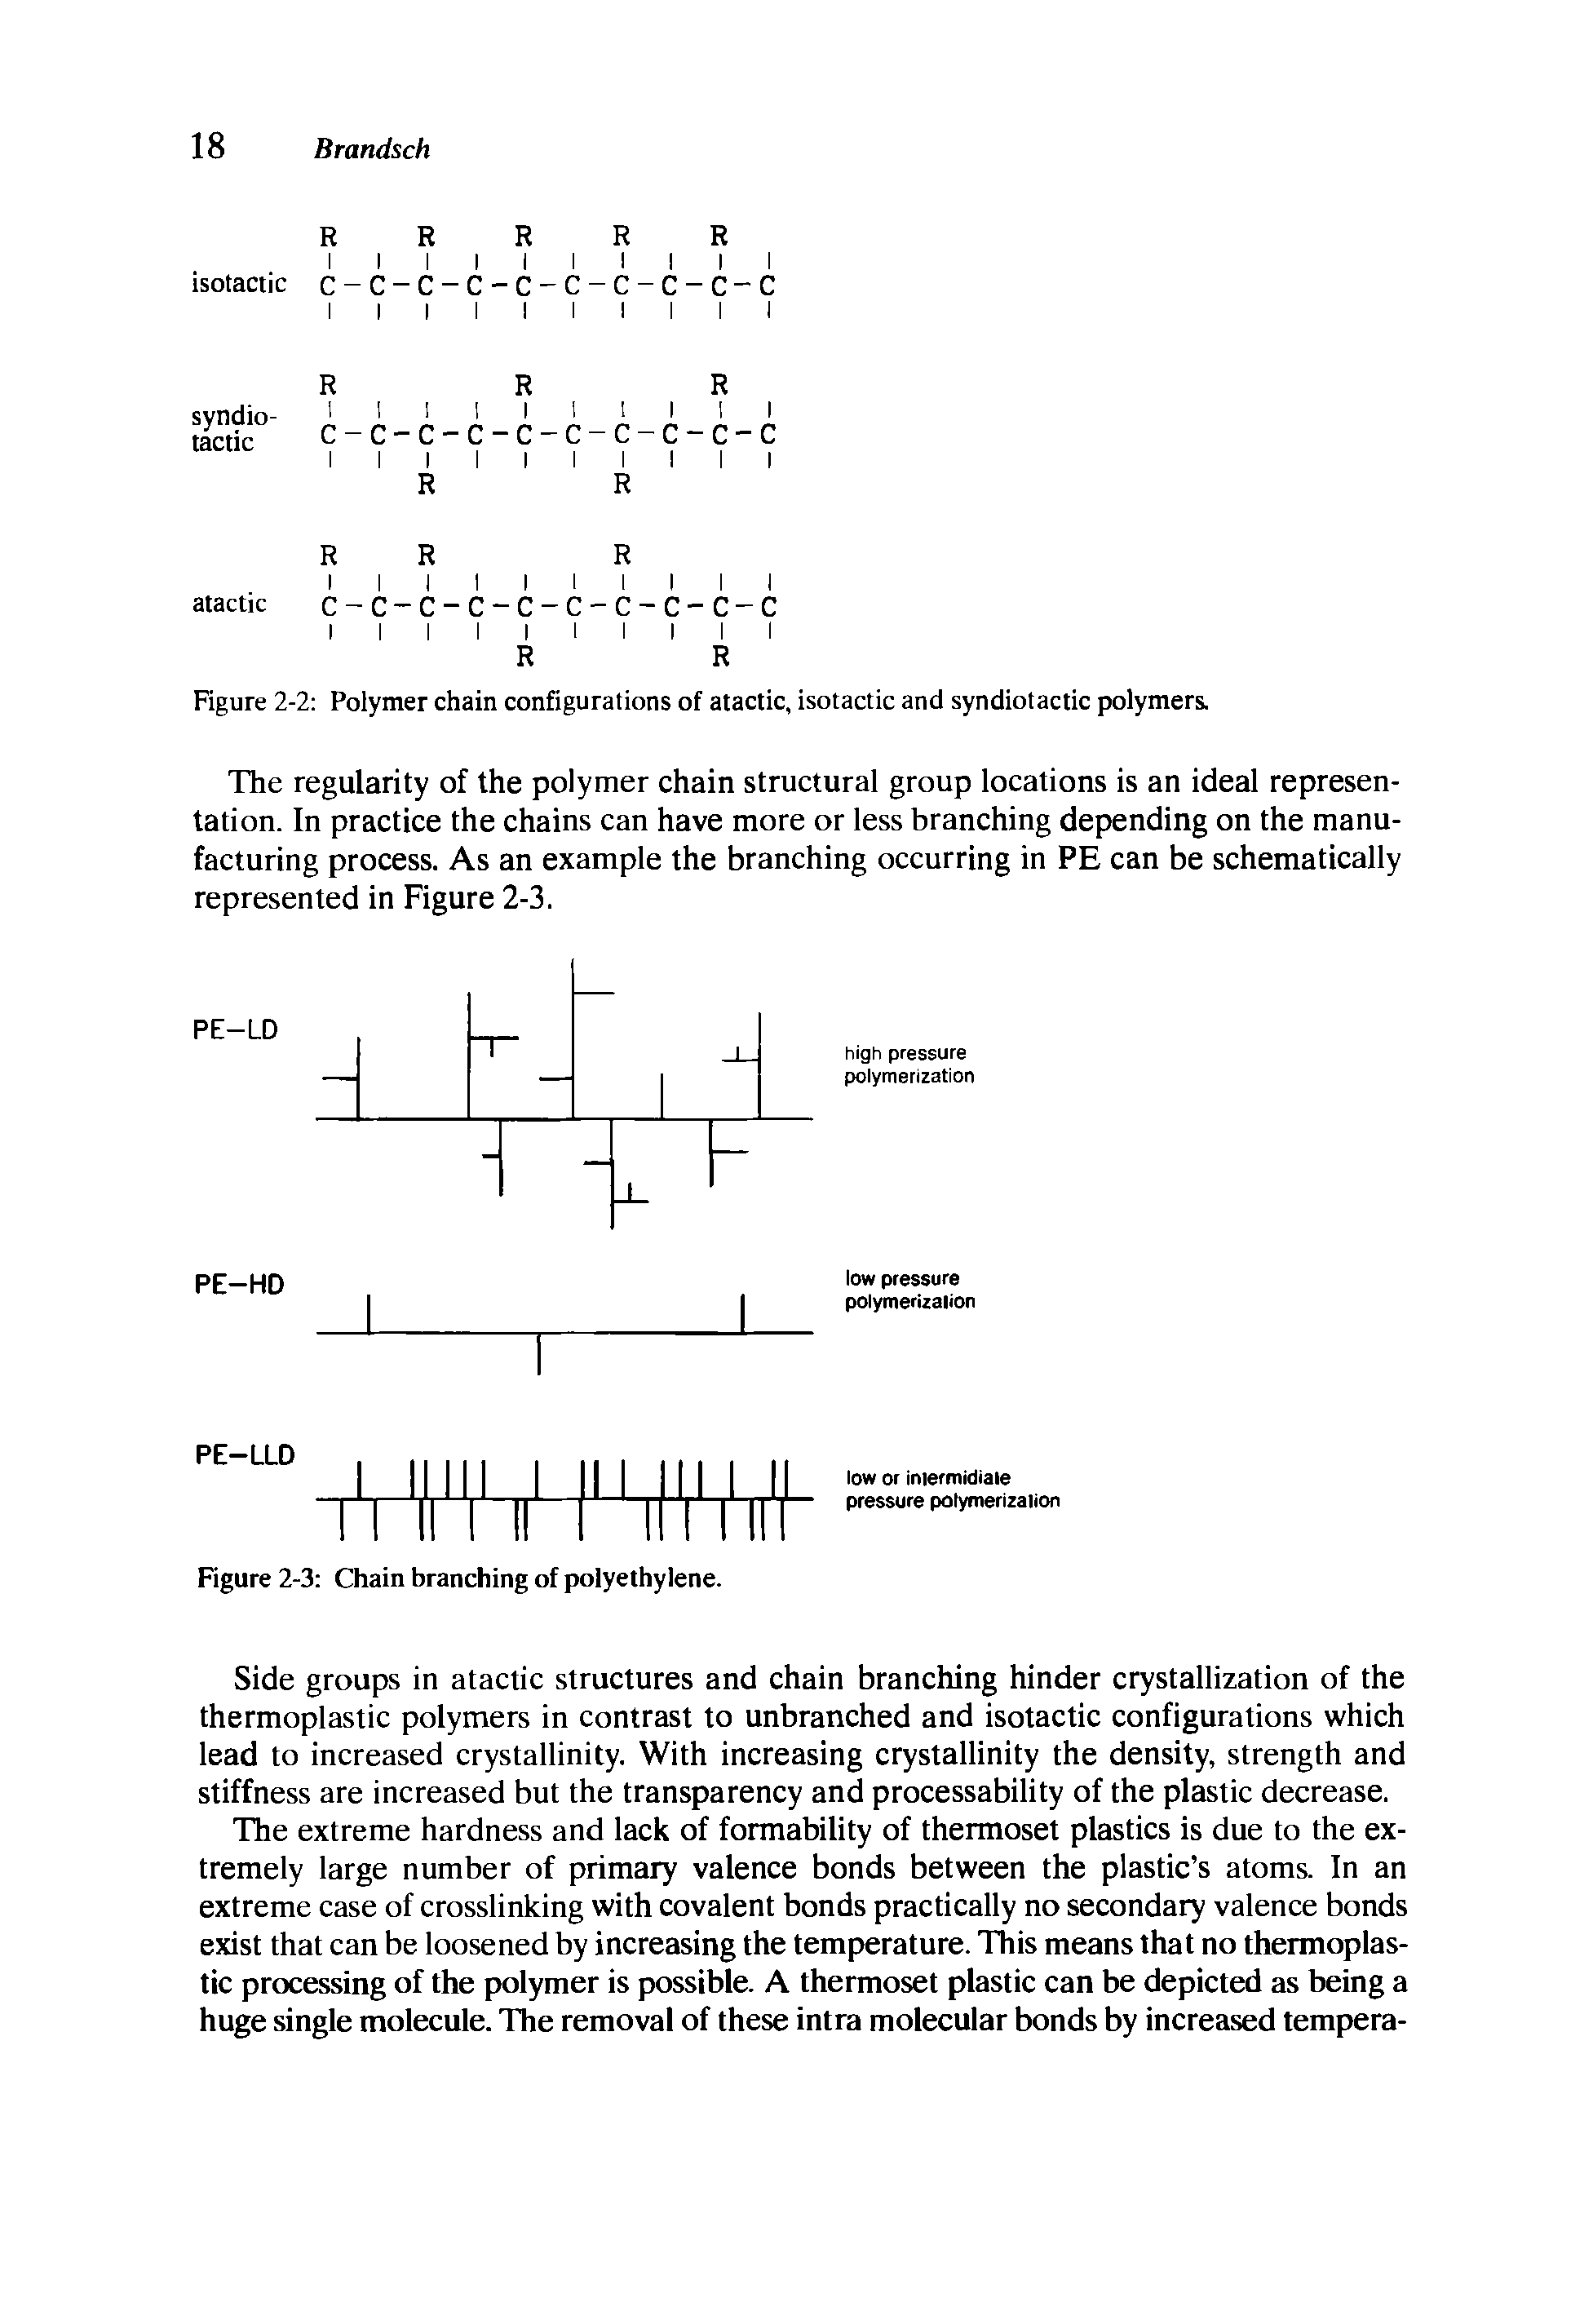 Figure 2-2 Polymer chain configurations of atactic, isotactic and syndiotactic polymers.